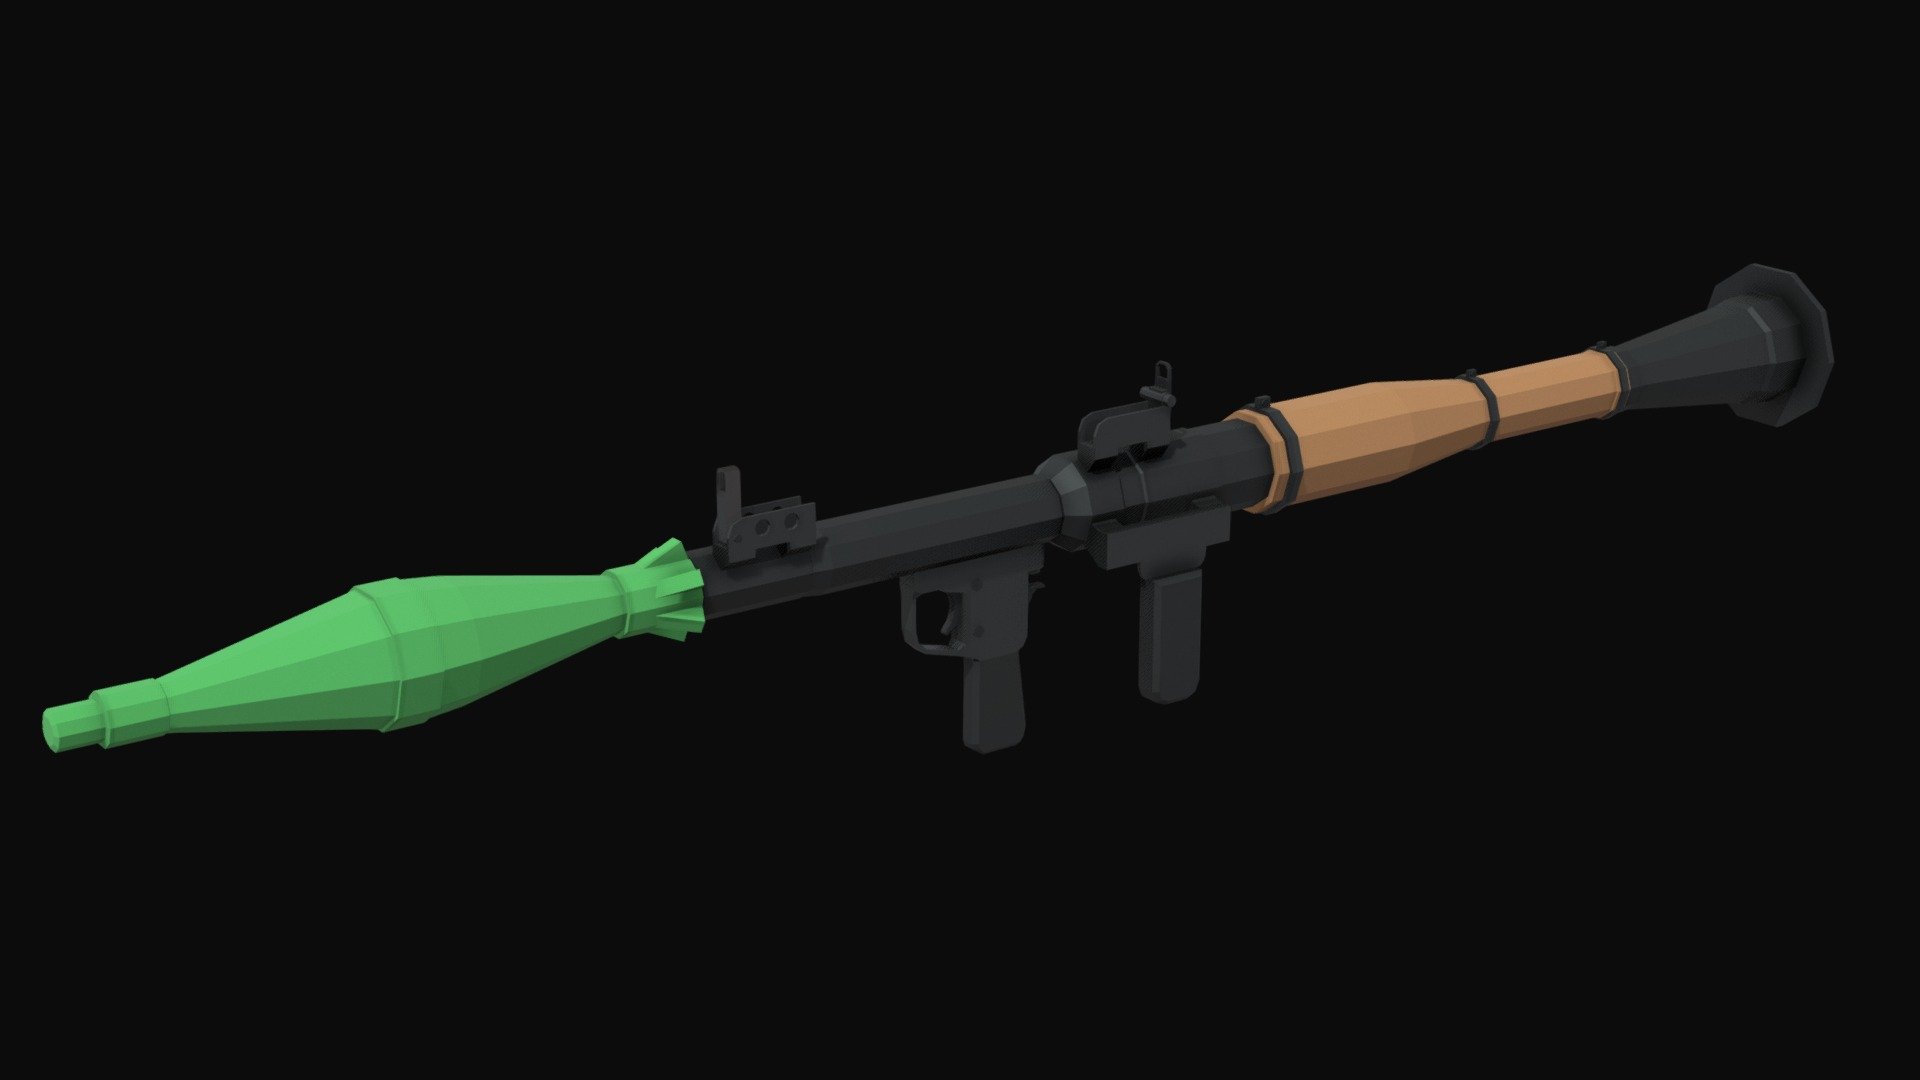 A low poly model of a RPG-7

Ideal for for use in games

Tested in unity. Simply drag and drop into unity to use

Made in blender - RPG-7 Low Poly - Buy Royalty Free 3D model by Castletyne 3d model